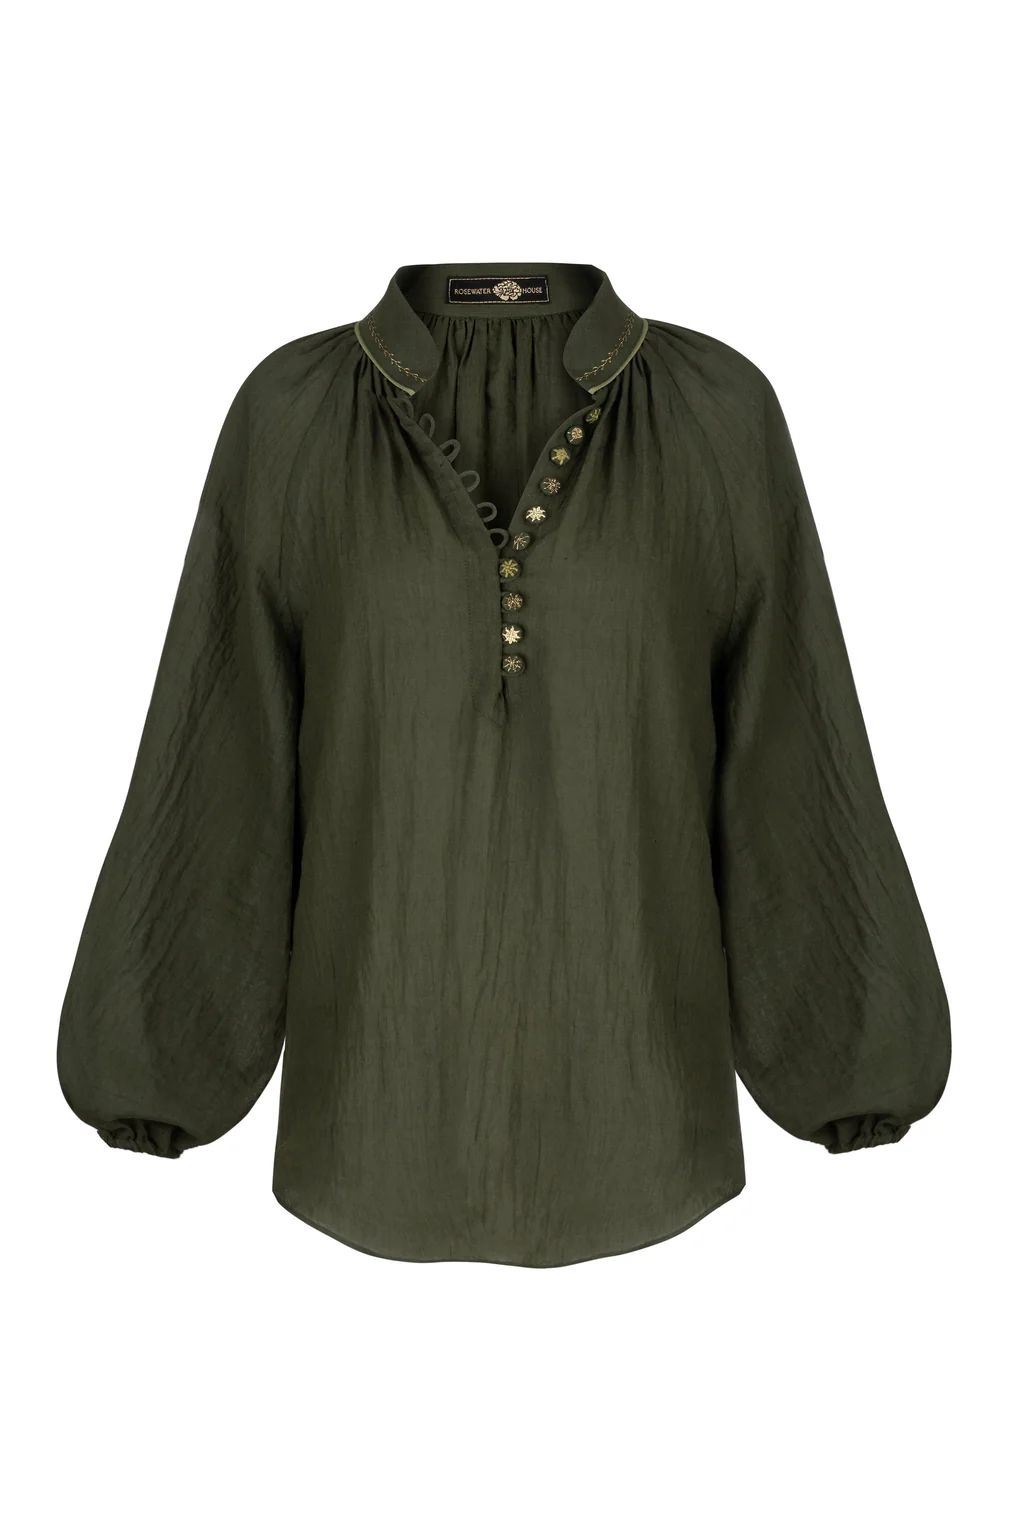 Golab Blouse - Khaki (Limited Edition) | Rosewater Collective